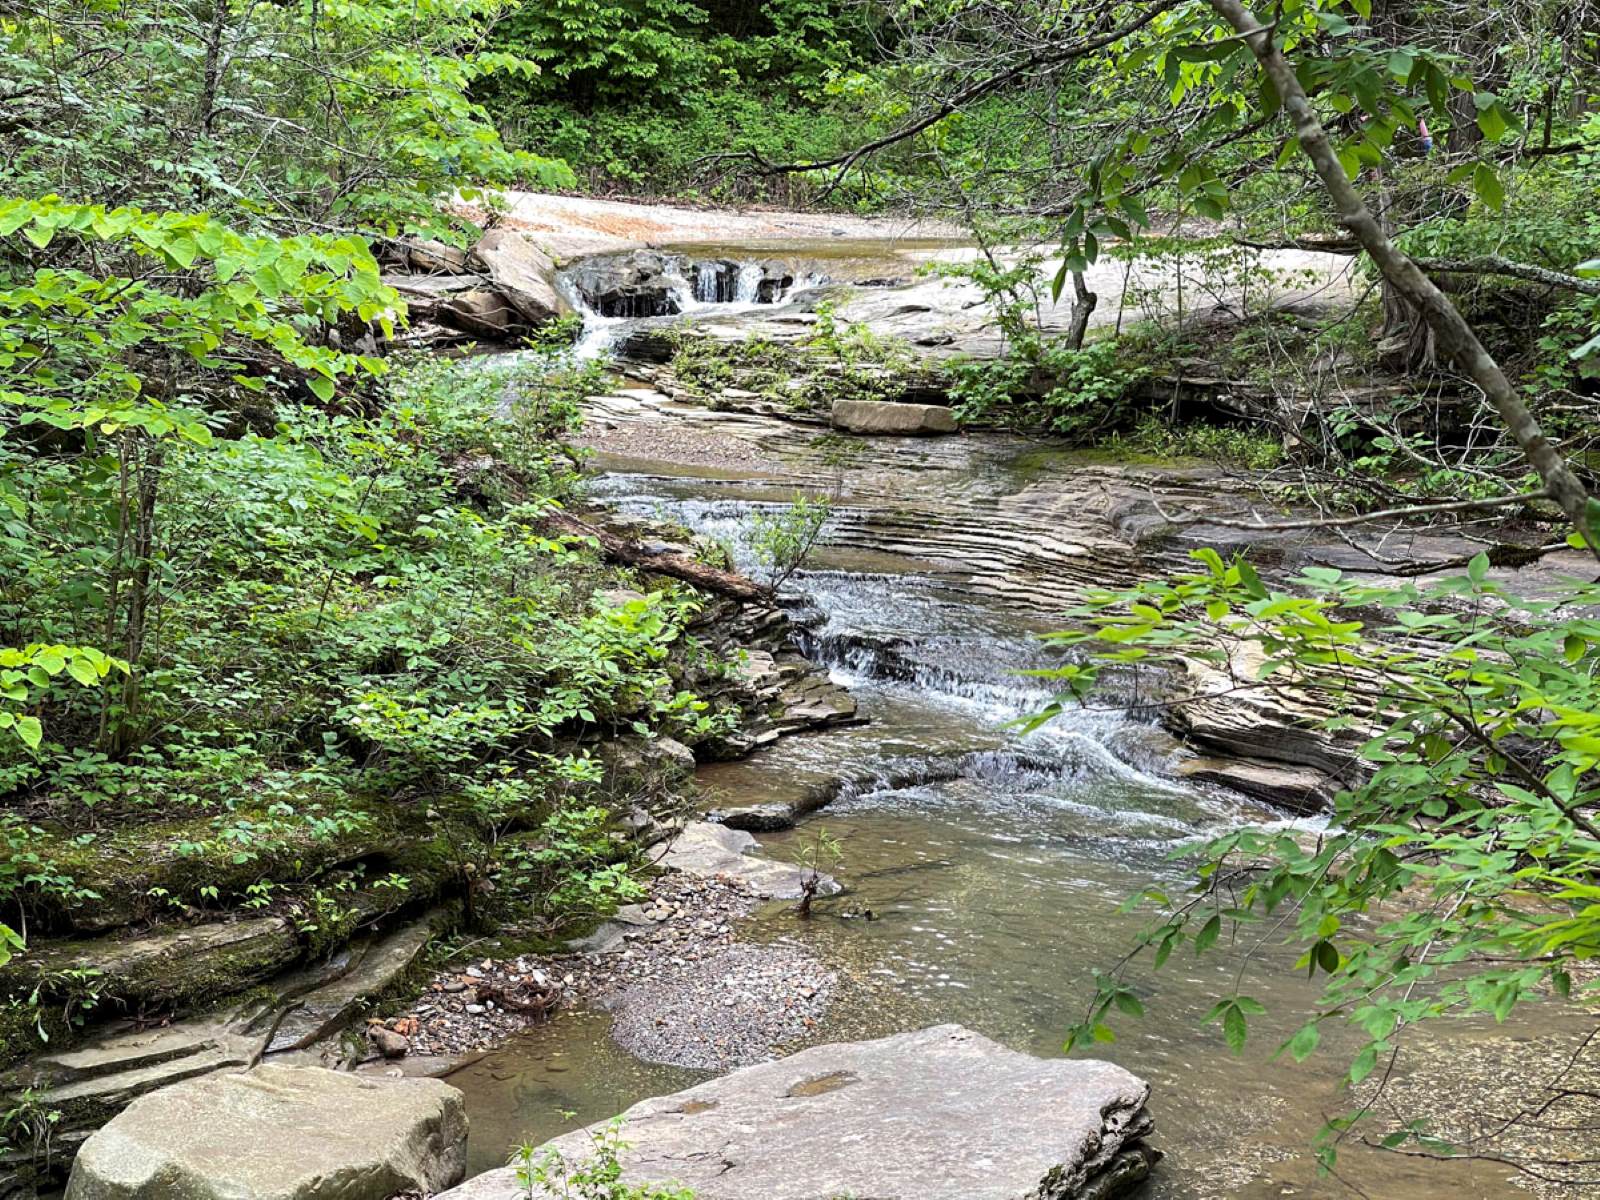 This pretty view can be found near the start of the trail to Paige and Broadwater Hollow Falls near the Buffalo National River in northwest Arkansas. (Photo by Sony Hocklander)